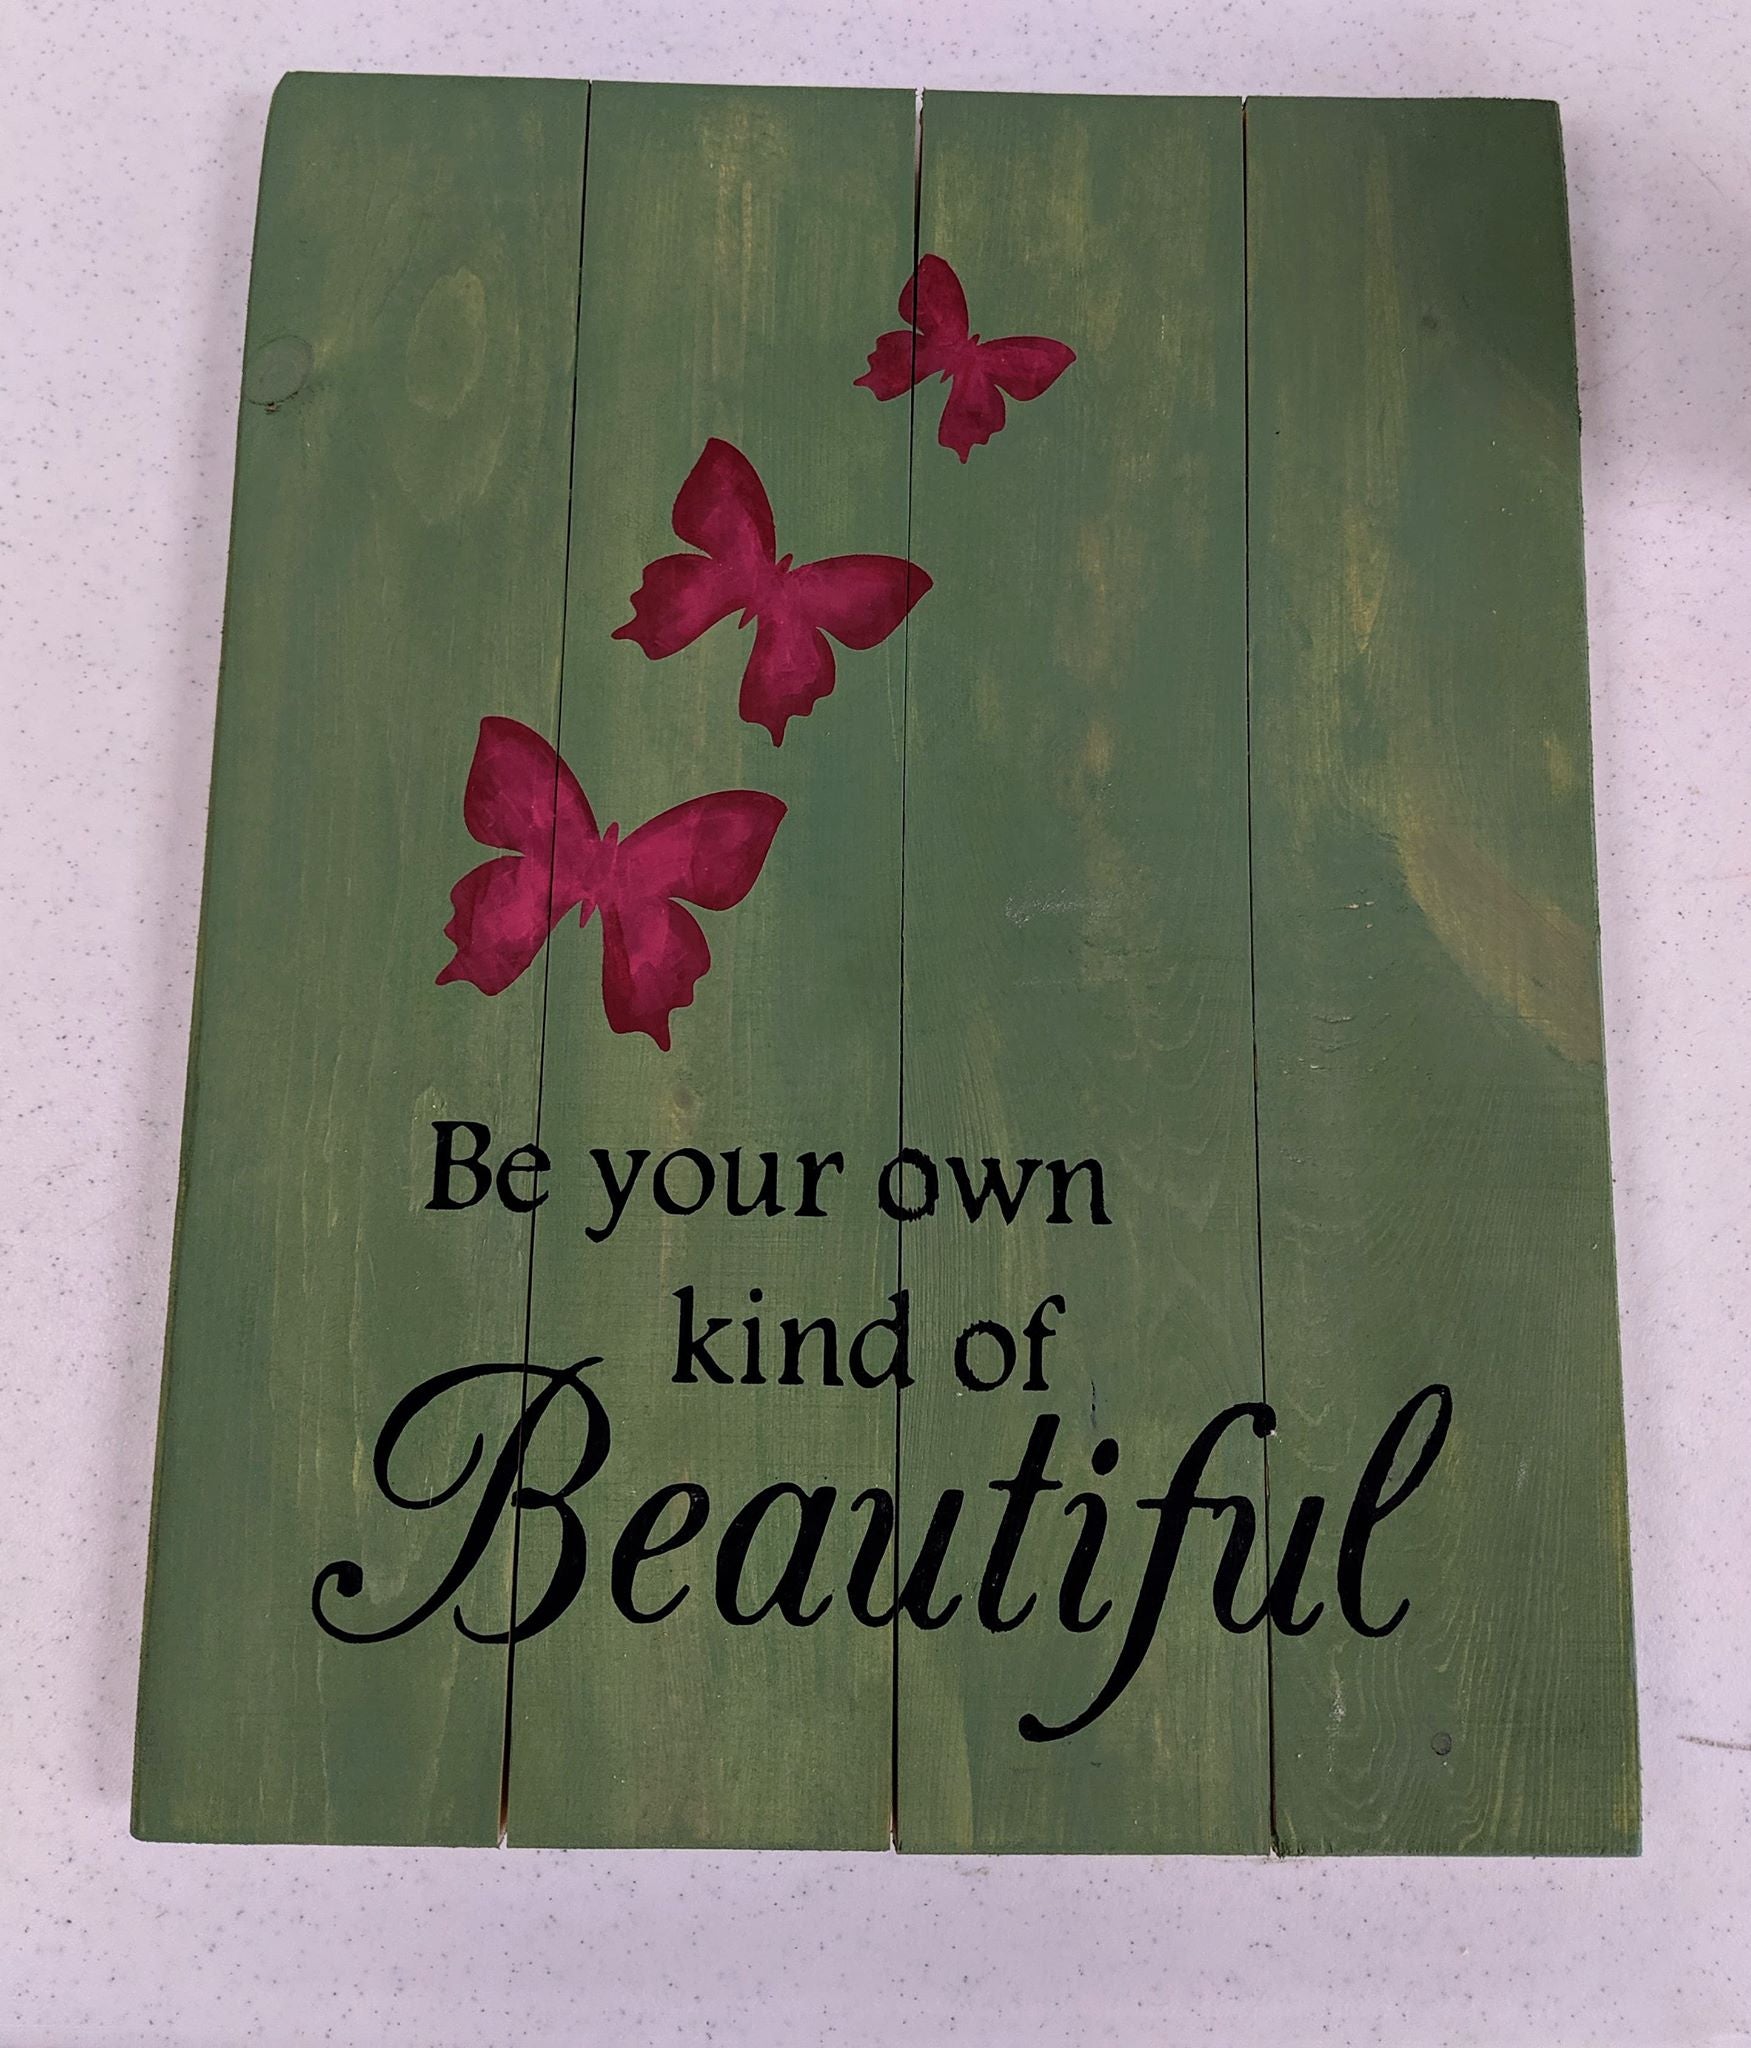 Be your own kind of beautiful with butterflies